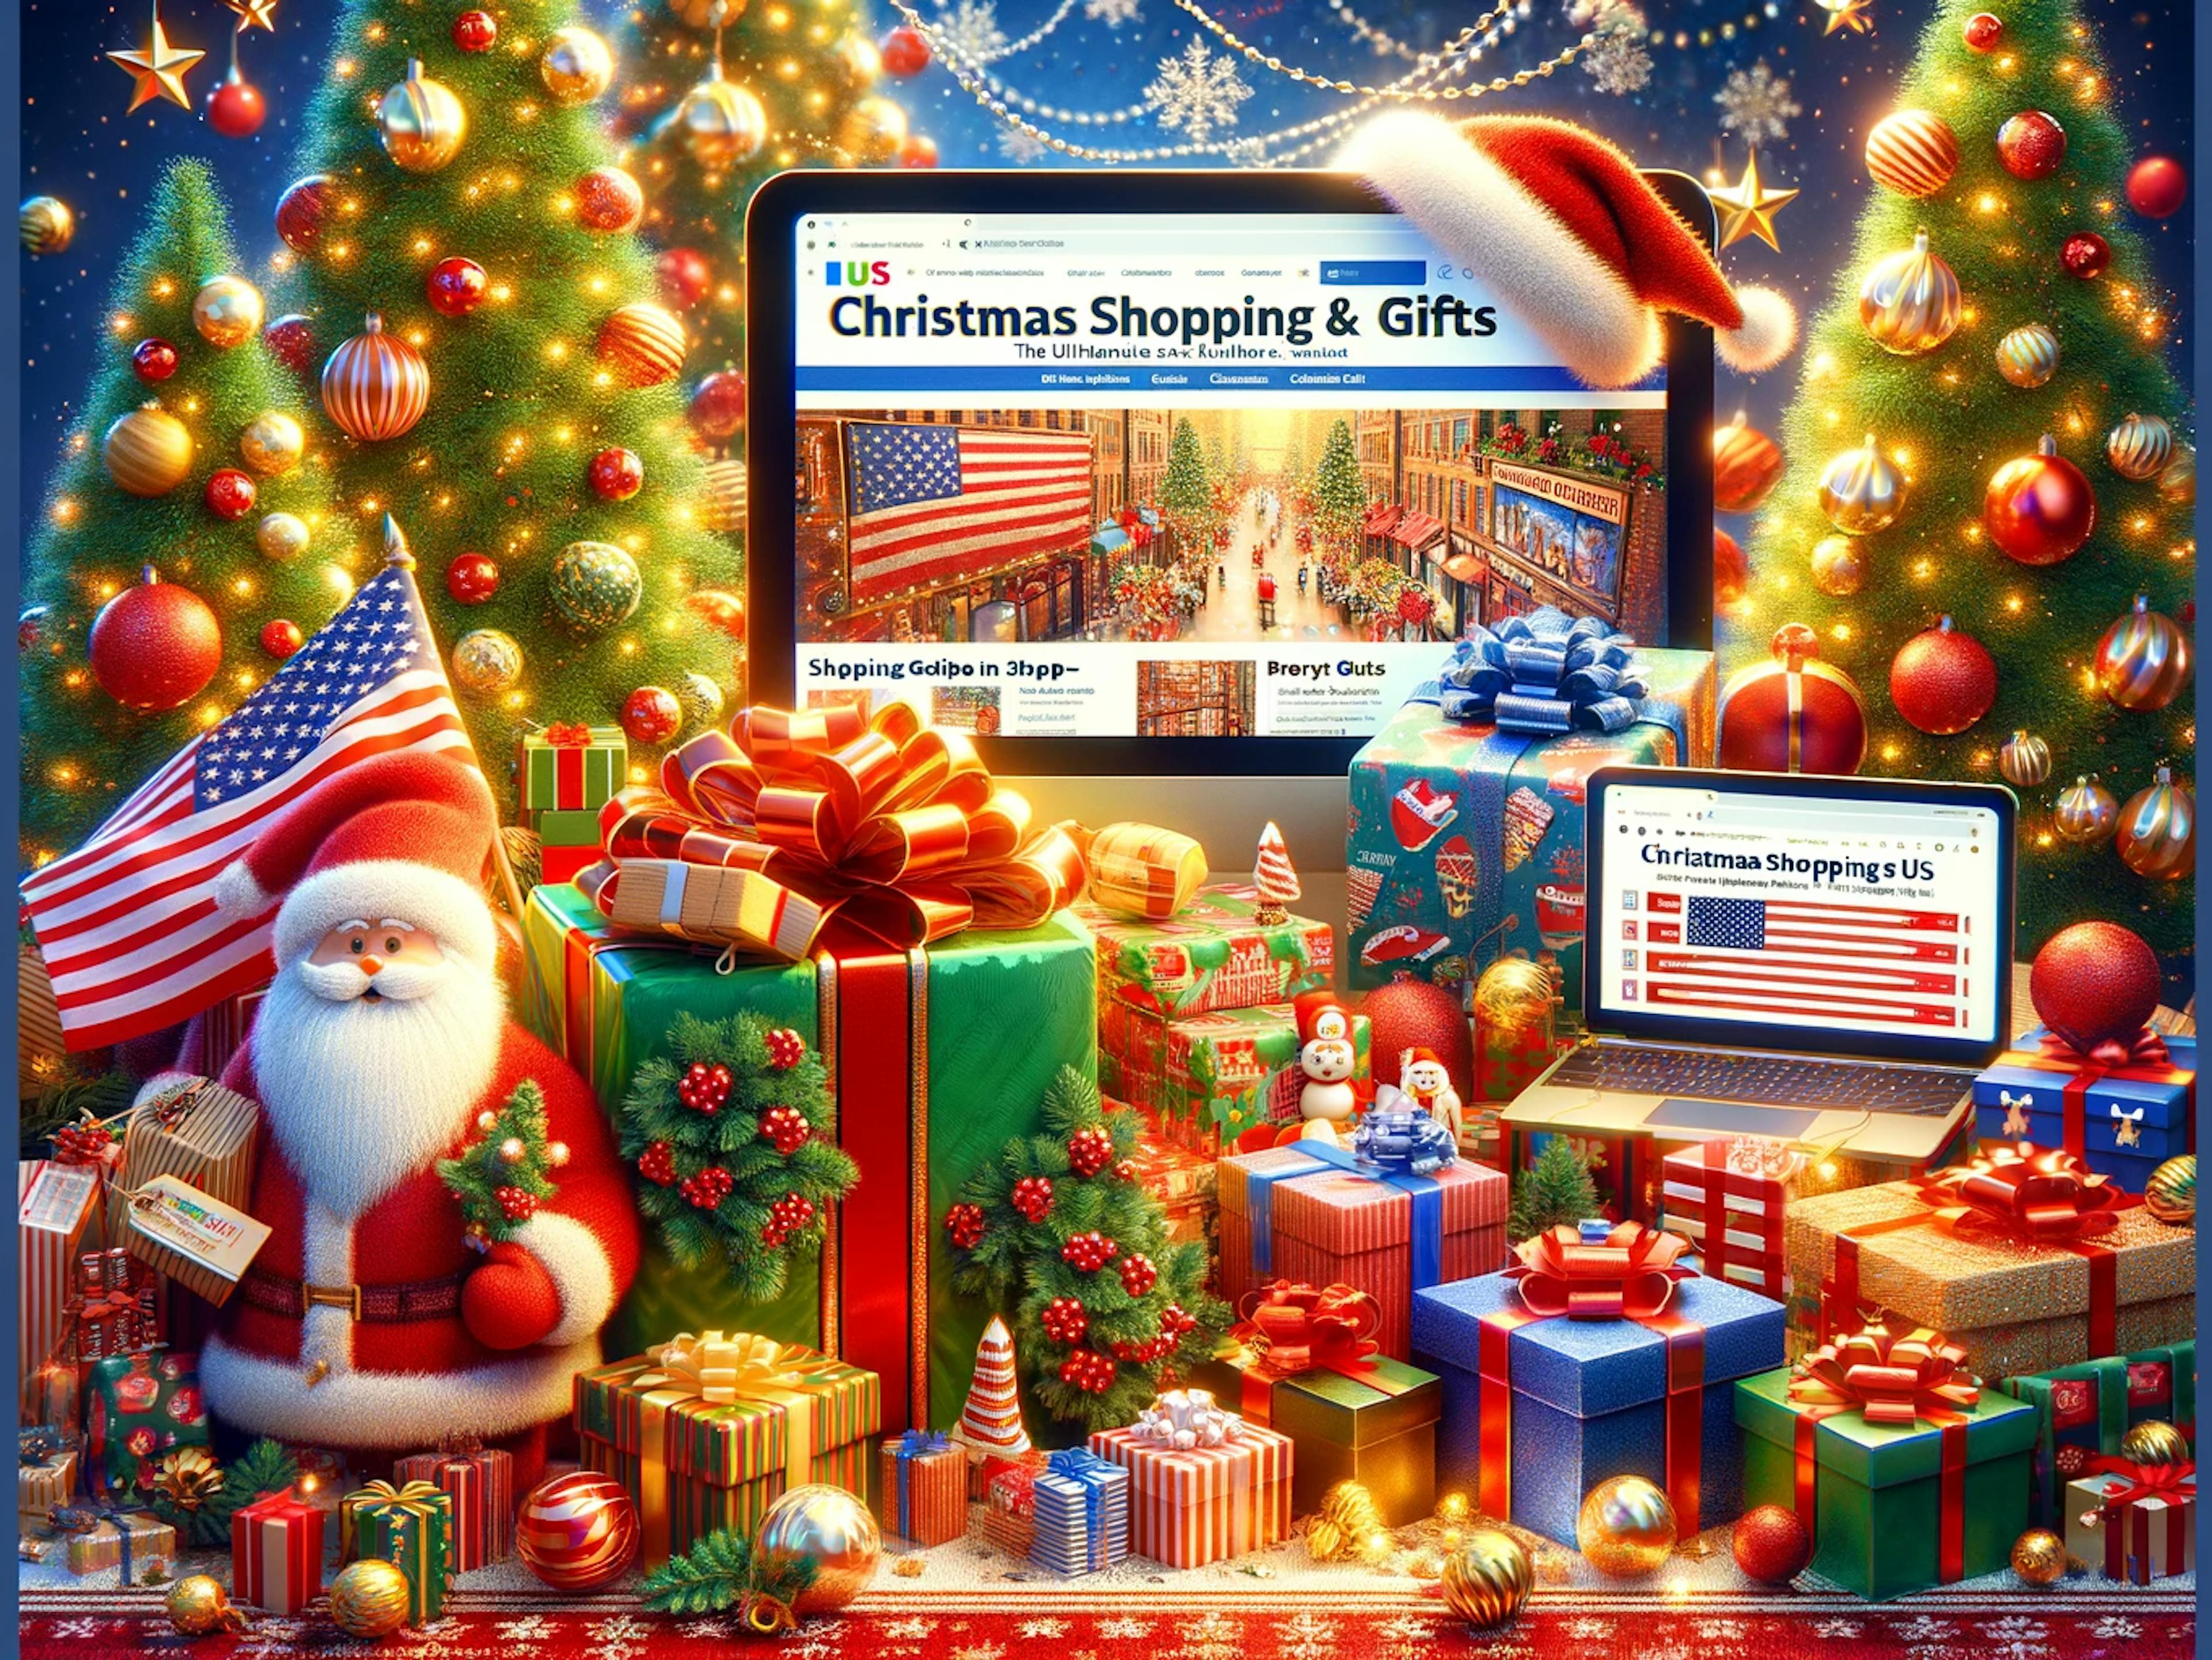 festive Christmas decorations, gift boxes, and symbols representing shopping in the US.